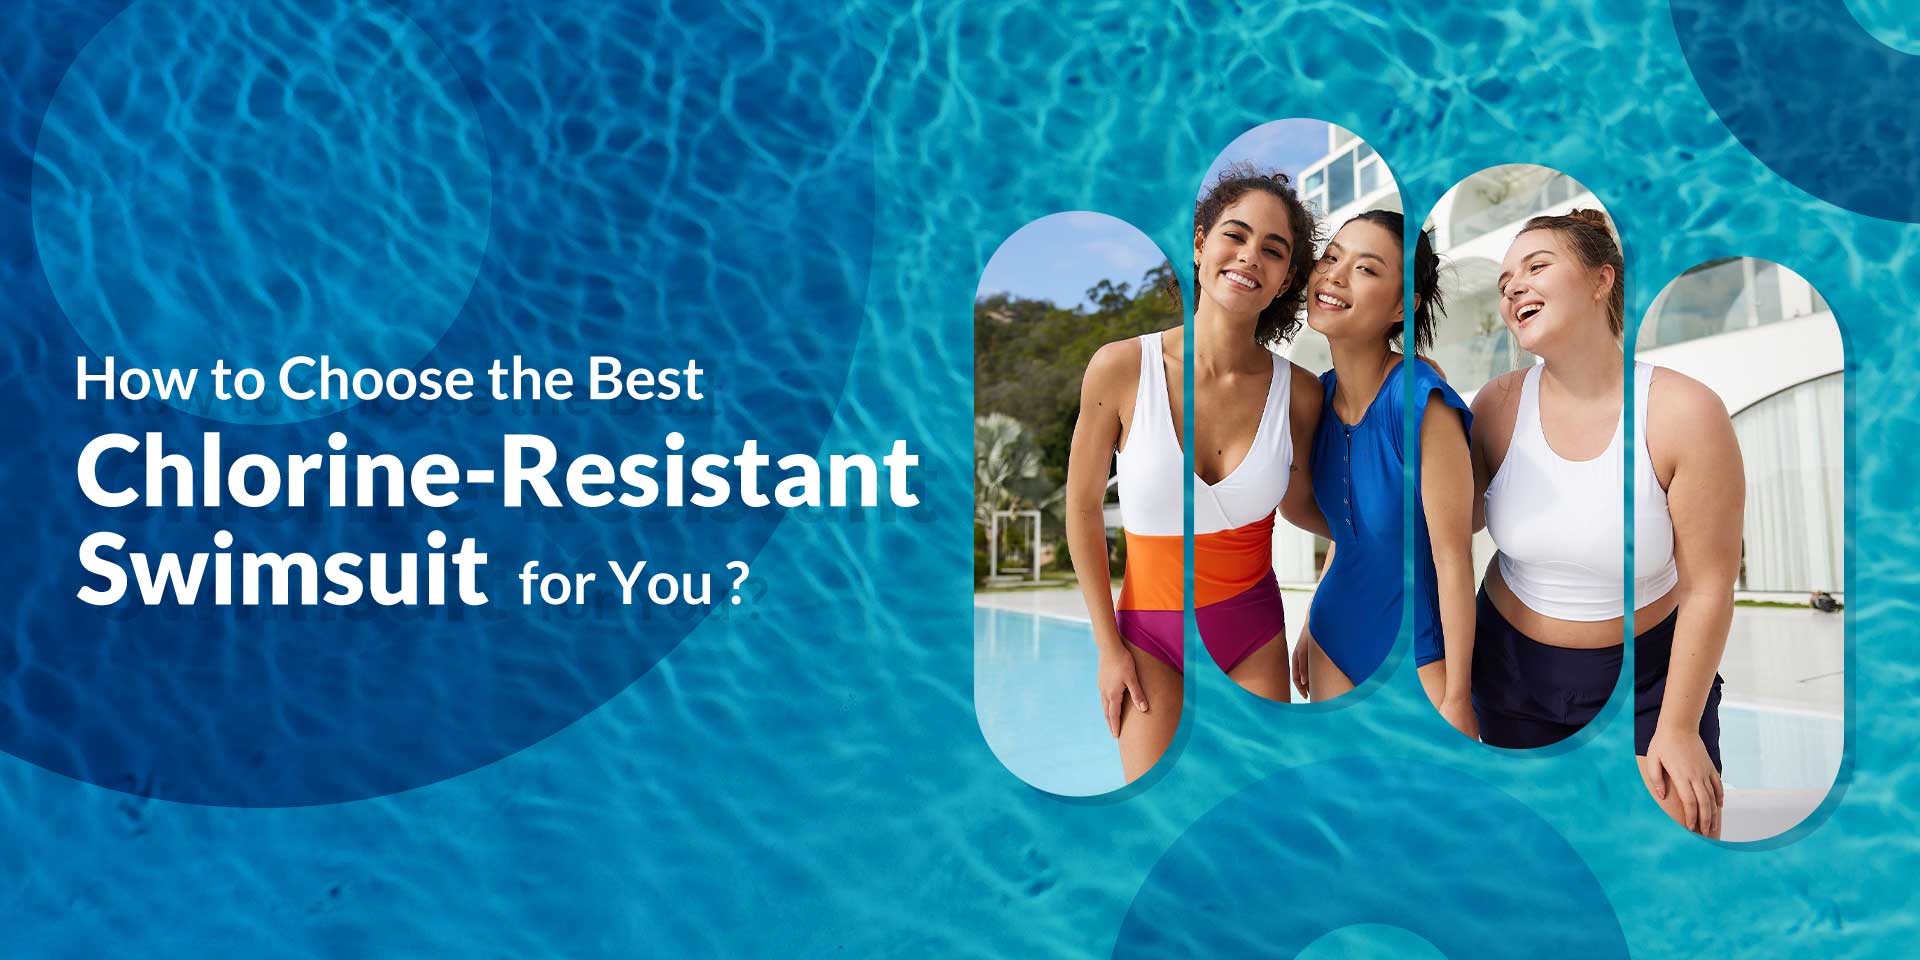 How to Choose the Best Chlorine-Resistant Swimsuit for You? – Baleaf Sports